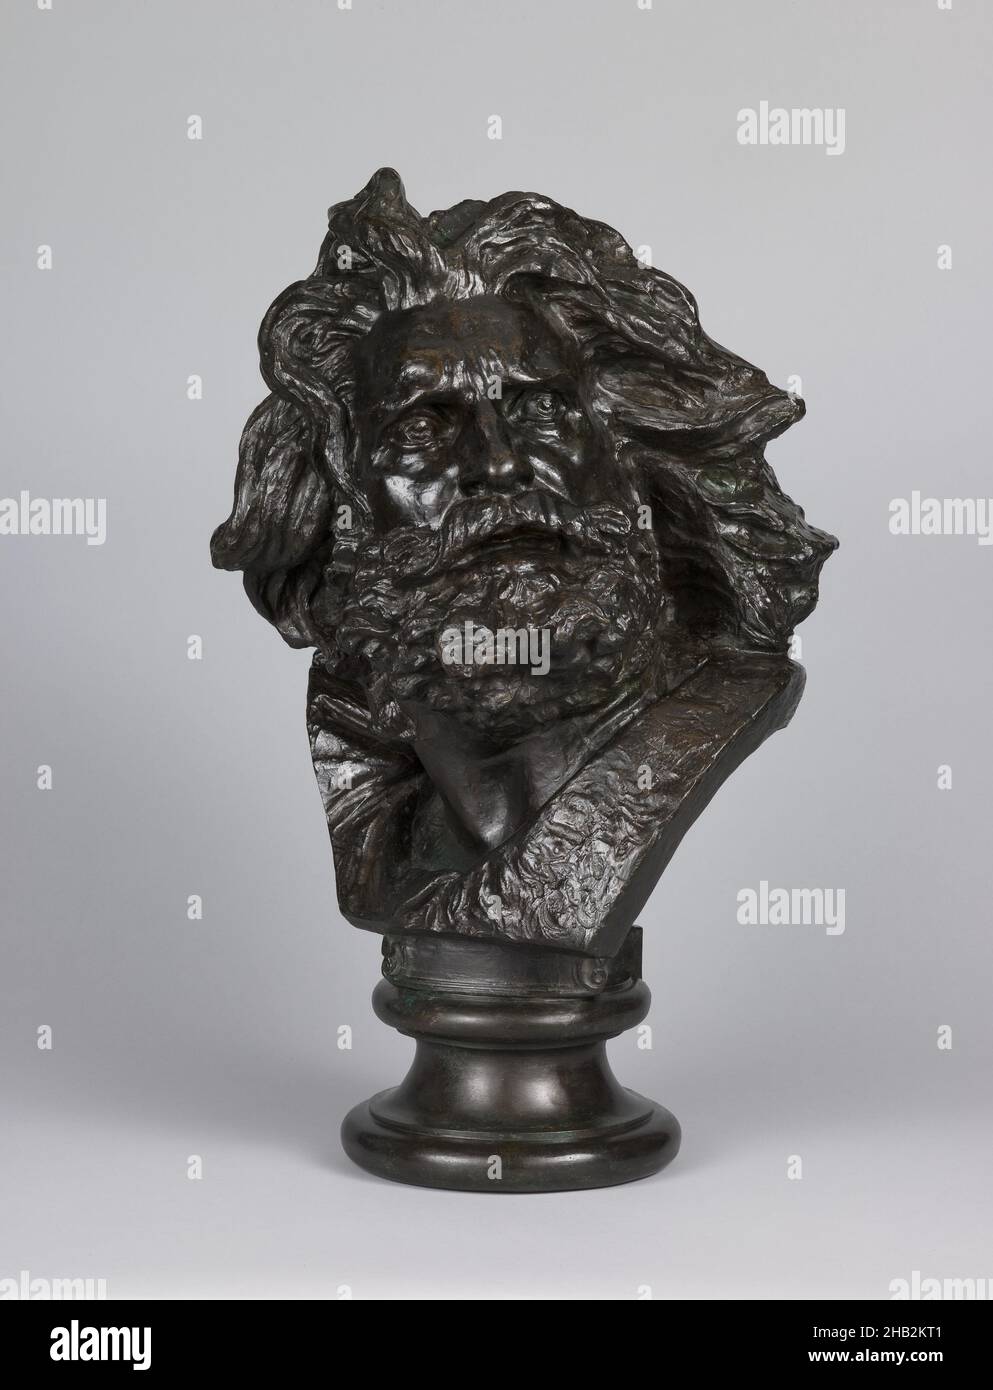 Head of a Gaul, François Rude, French, 1784–1855, c.1833–35, Bronze, Metalwork, sculpture, 24 1/2 x 12 3/4 x 12 1/4 in. (62.2 x 32.4 x 31.1 cm Stock Photo